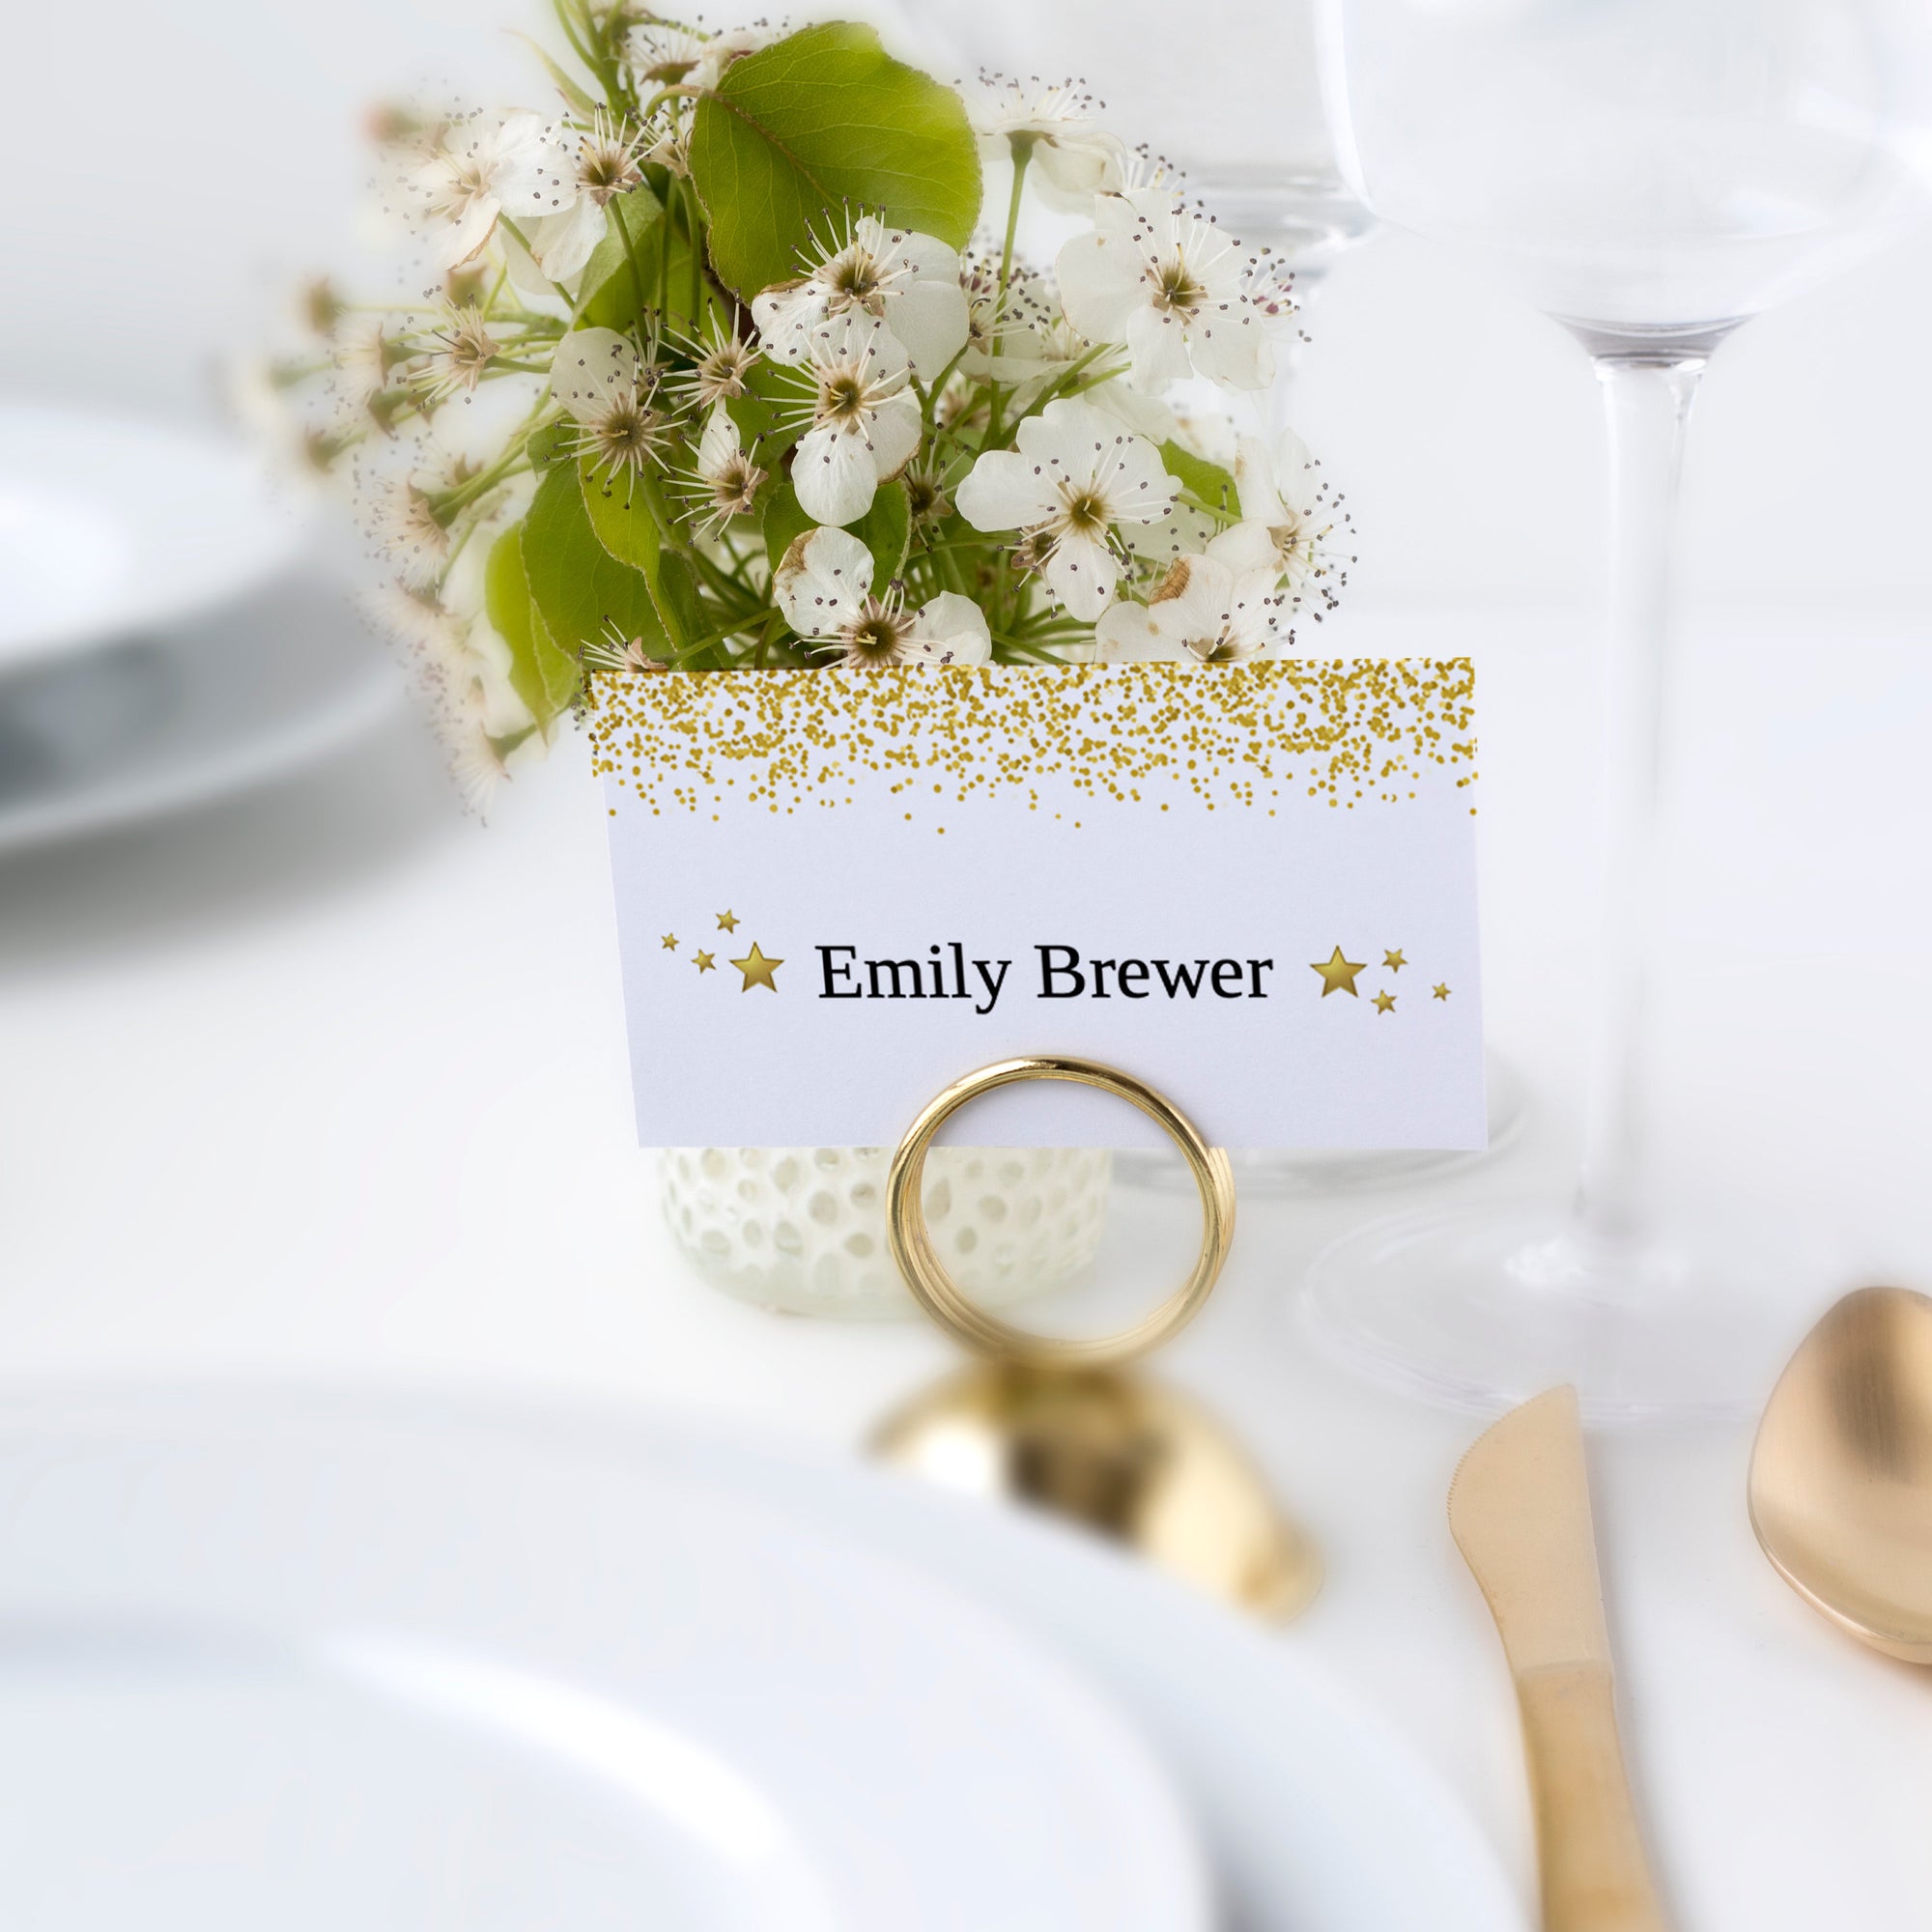 2020 New Years Eve Place Cards Template, Printable New Years Eve Decorations, Personalized New Years Name Cards, DIGITAL DOWNLOAD - NY100